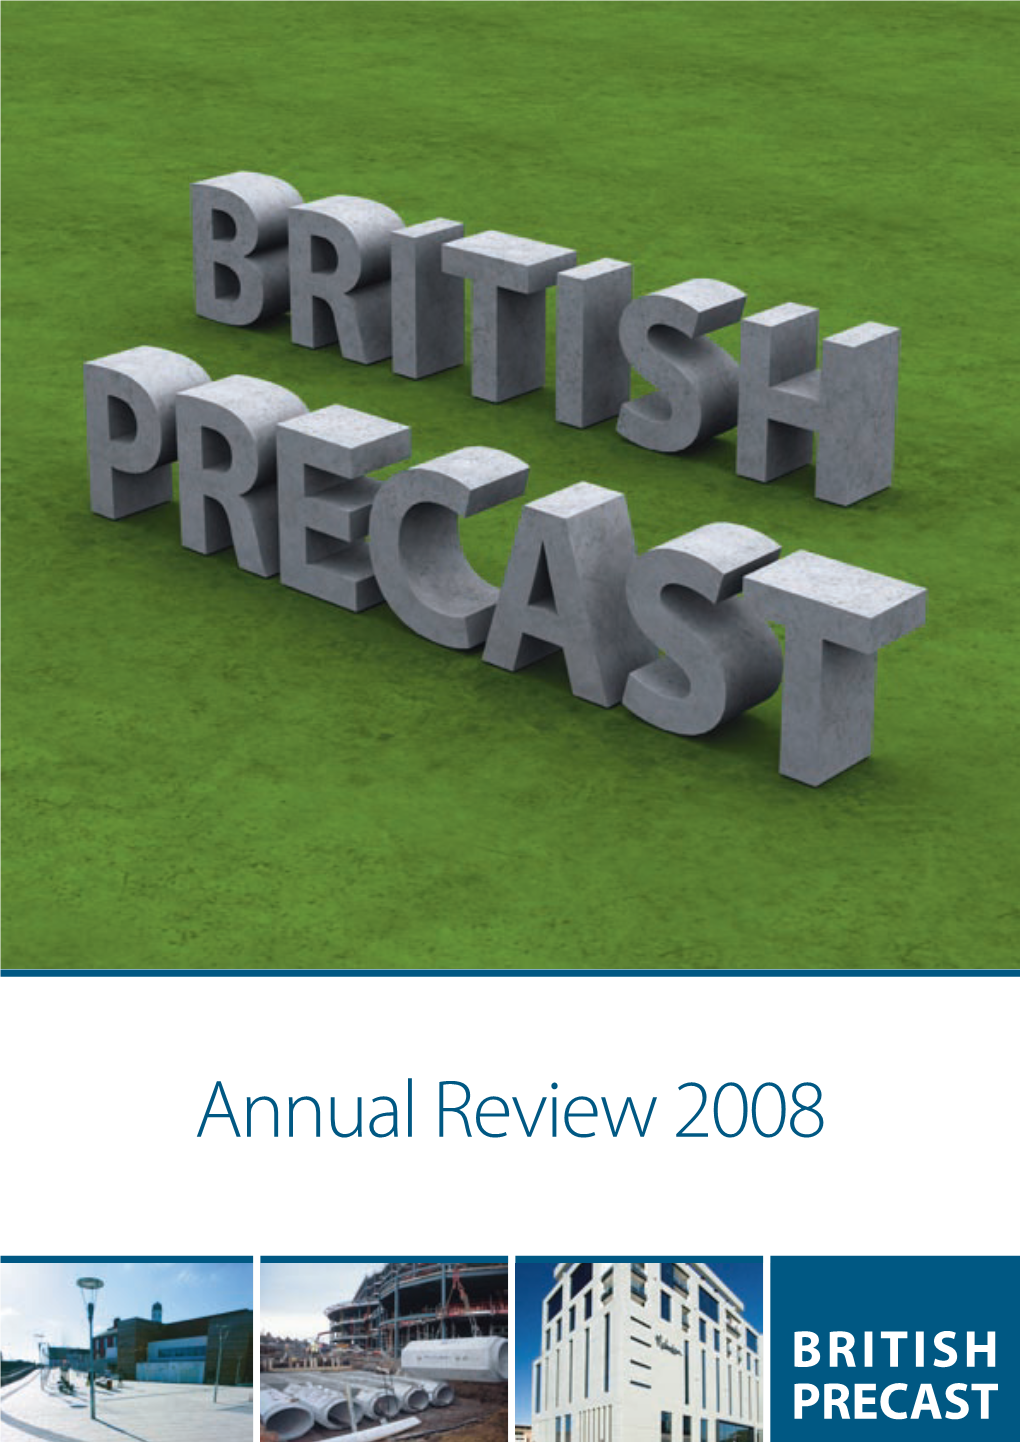 Annual Review 2008 Contents